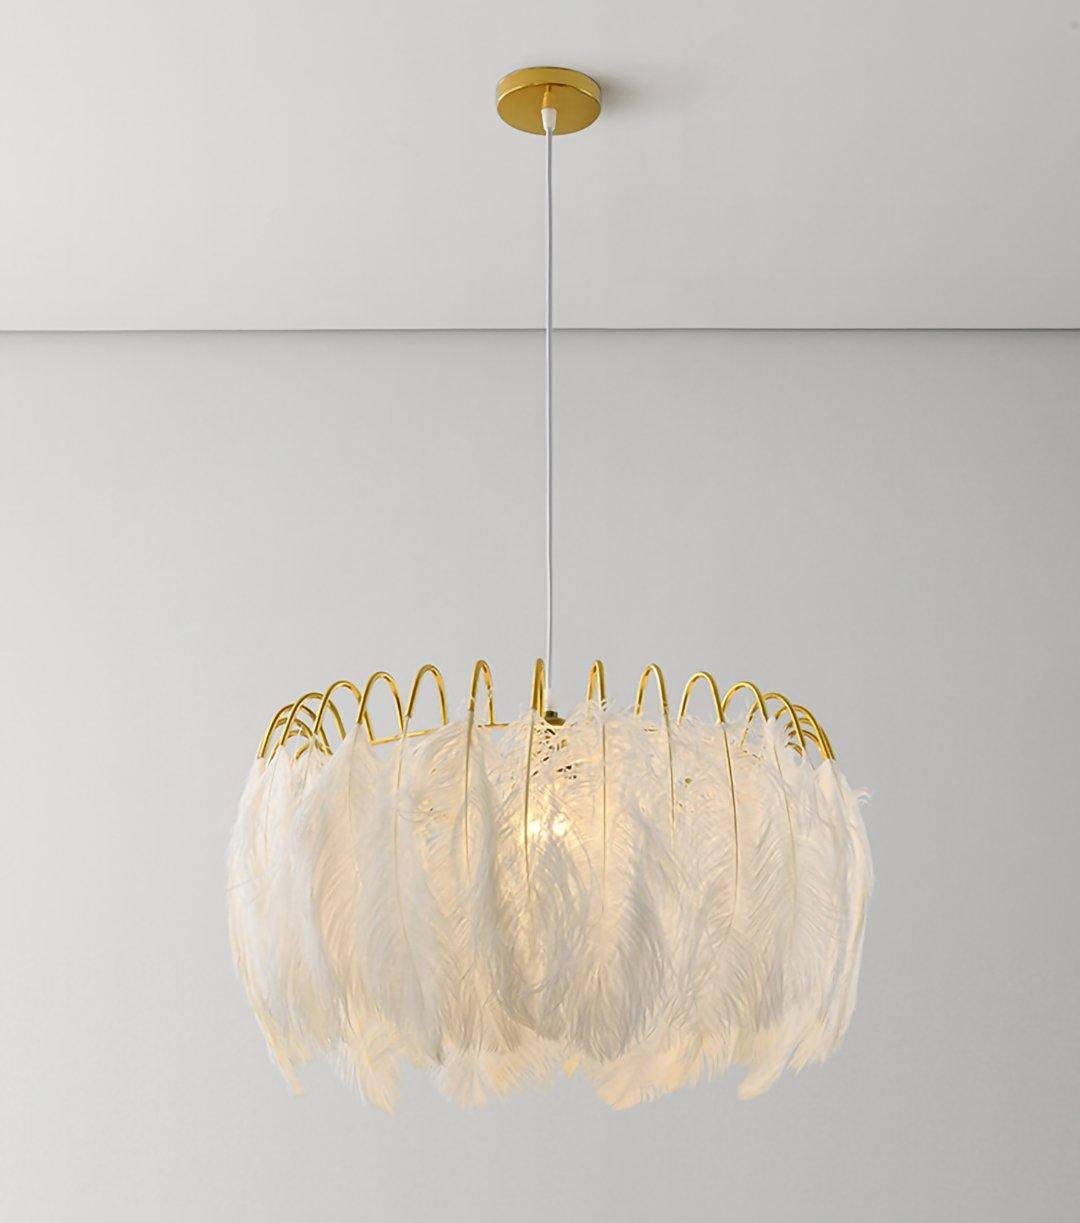 Model A White Feather Pendant Lamp - 23.6 Inch Diameter, 15.8 Inch Height (or 60cm Diameter, 40cm Height)